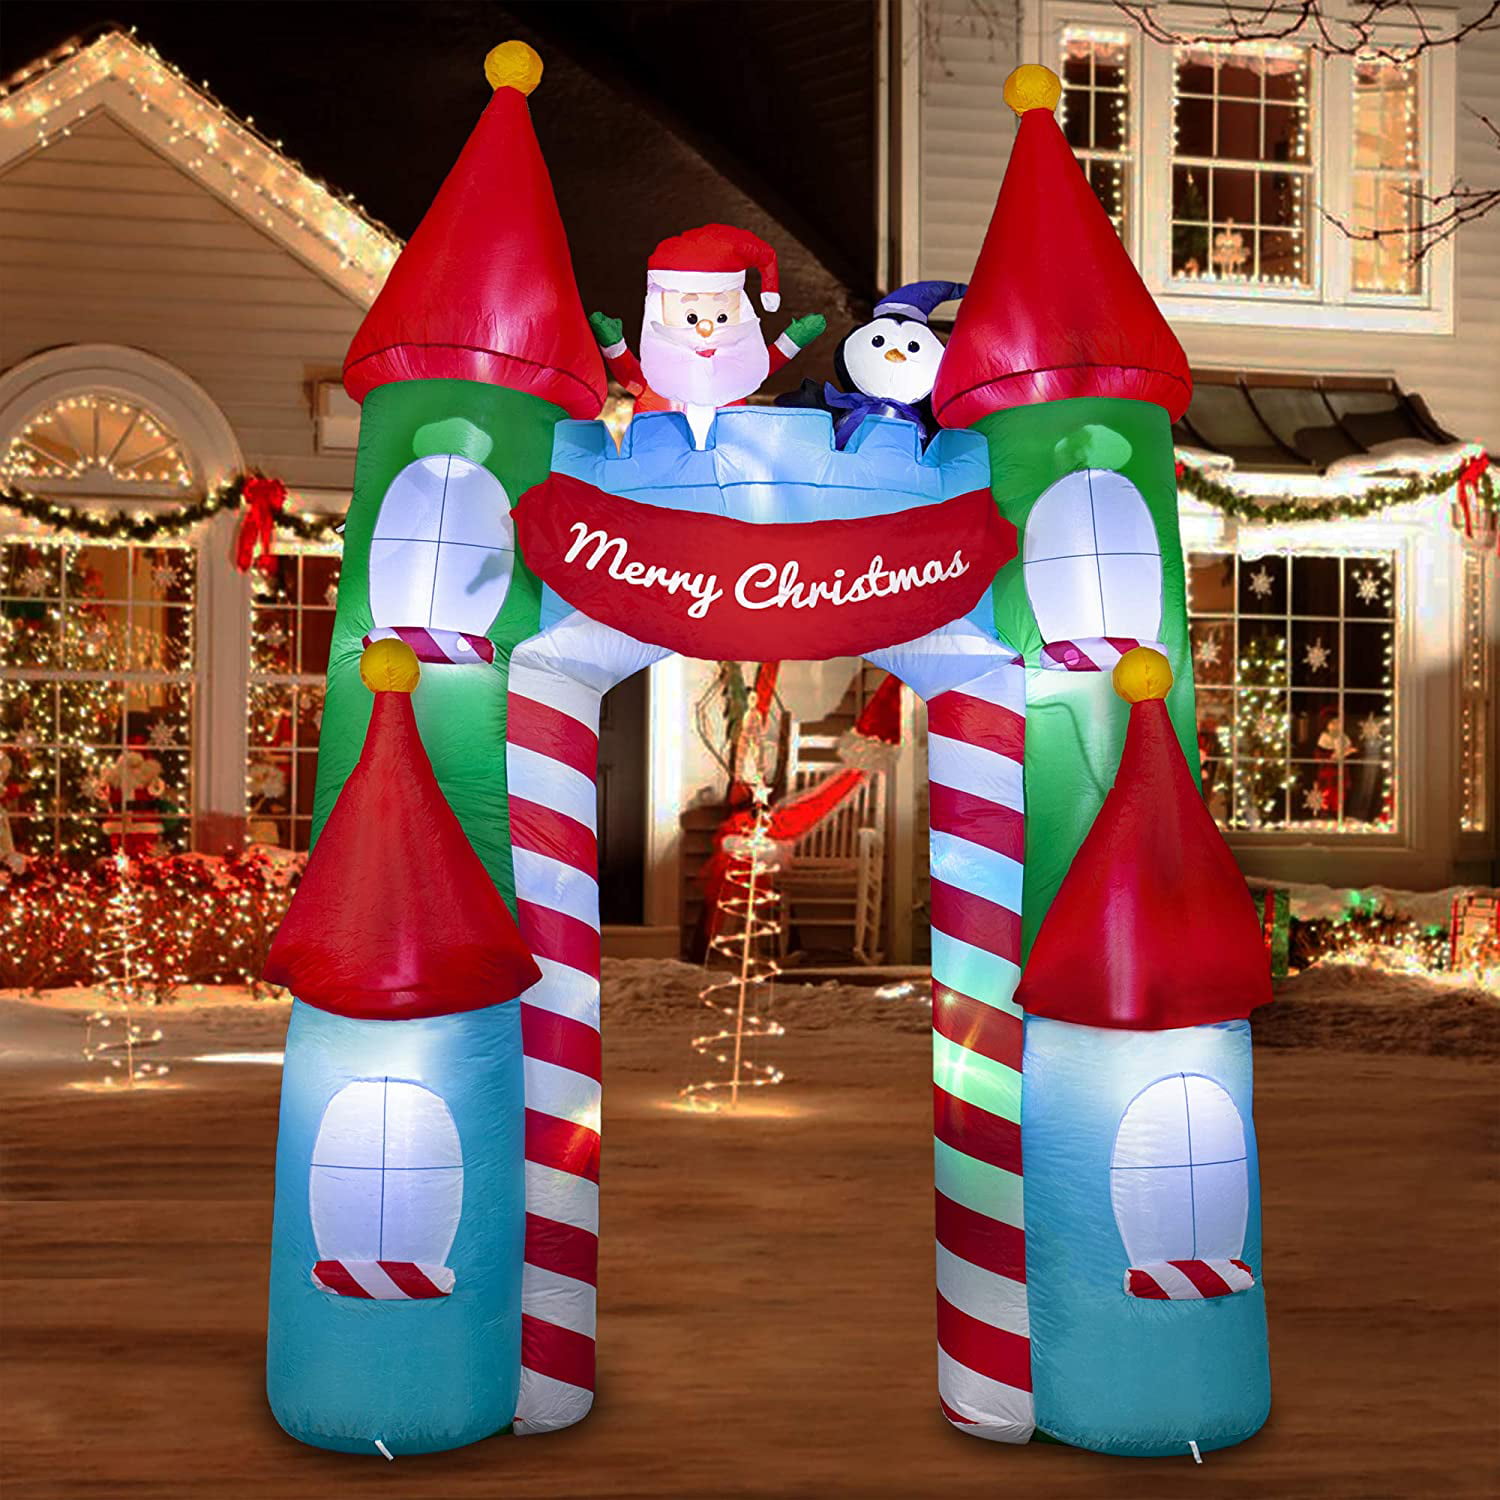 outdoor christmas decorations blow ups OFF 65%